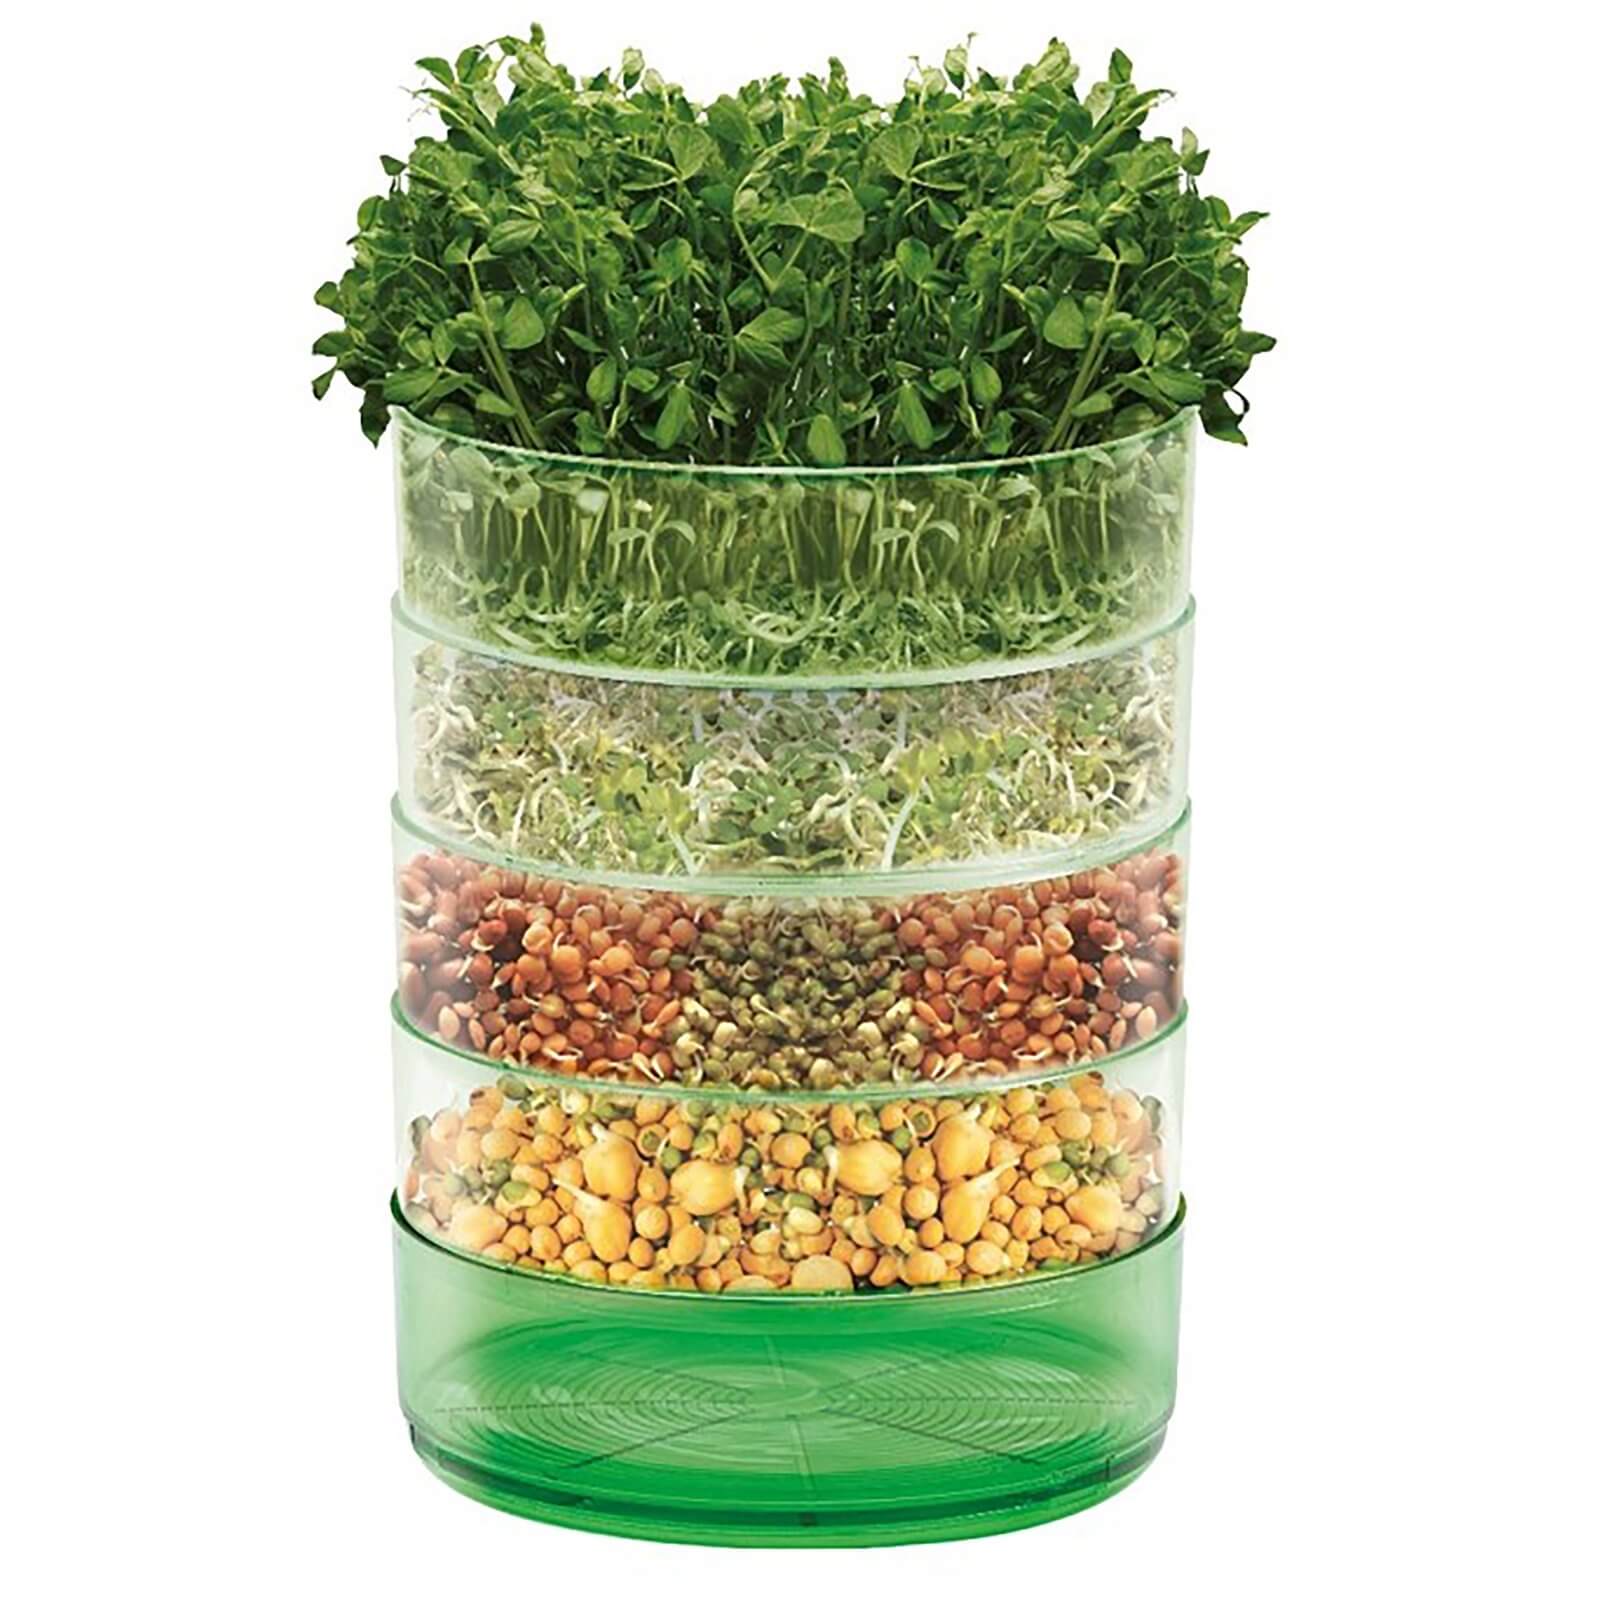 Mr. Fothergill's Microgreens Kitchen Seed Sprouter